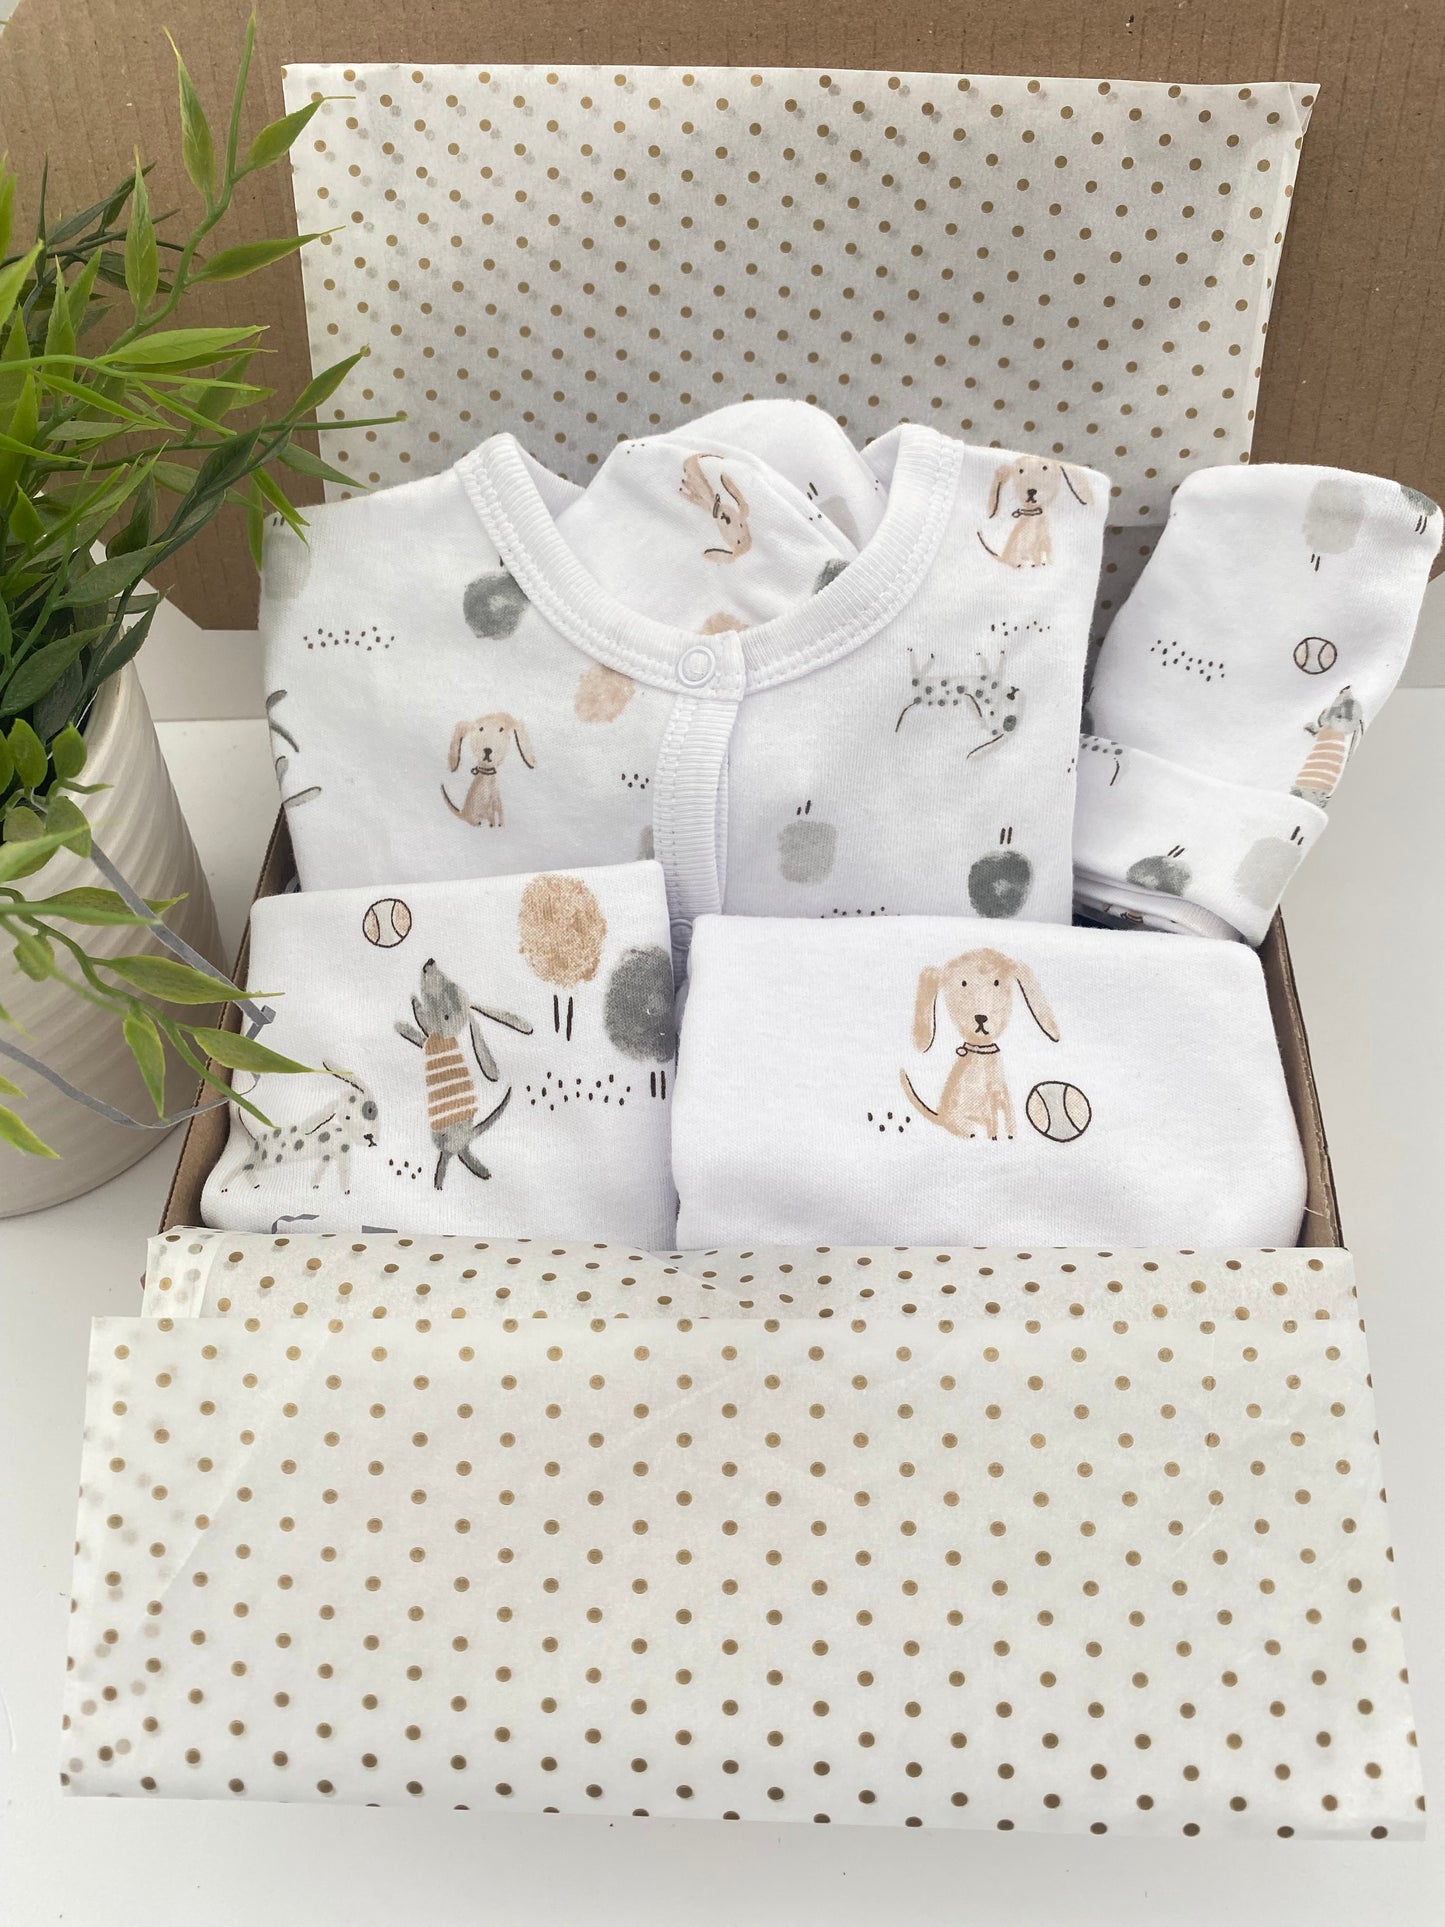 Luxury Neutral New Parents Gift Hamper, Puppy Soft Toy, Cotton Layette Set, Baby Gift Sets, Corporate New Baby Presents